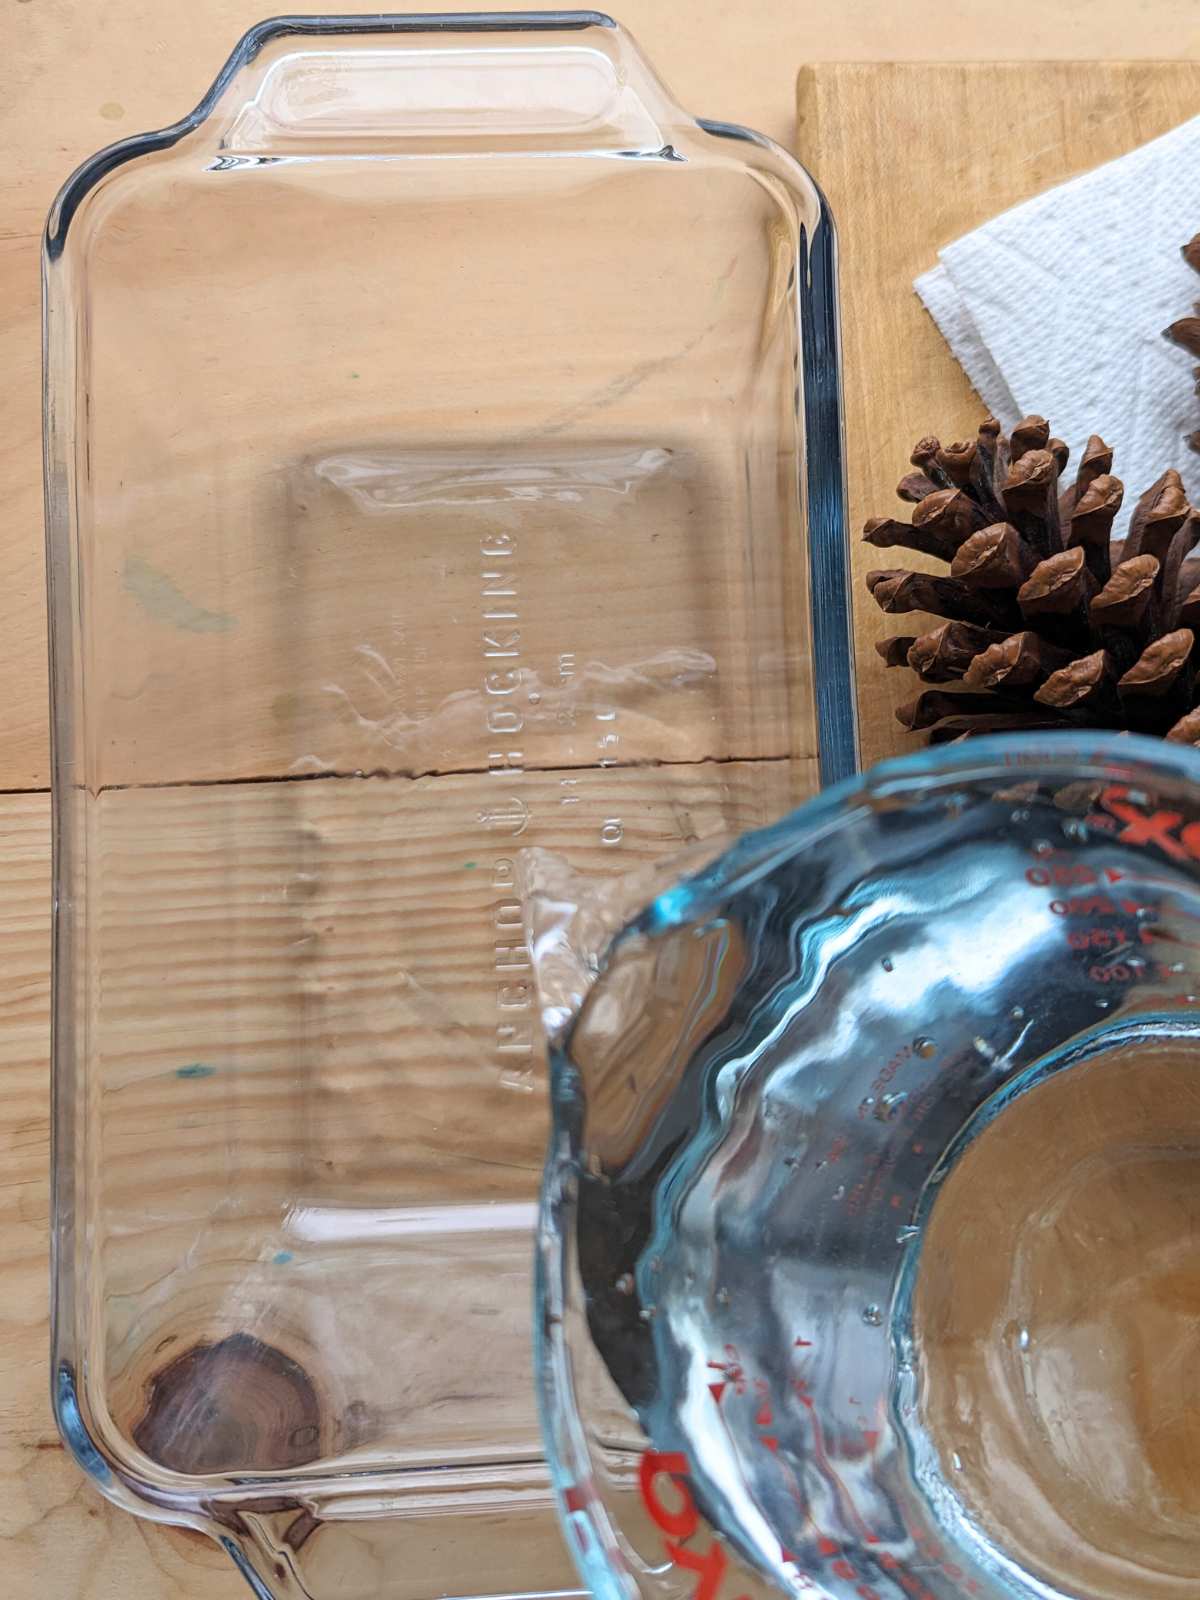 Glass measuring cup pouring water into a glass dish on a wooden table with a pinecone and paper towel on the right.